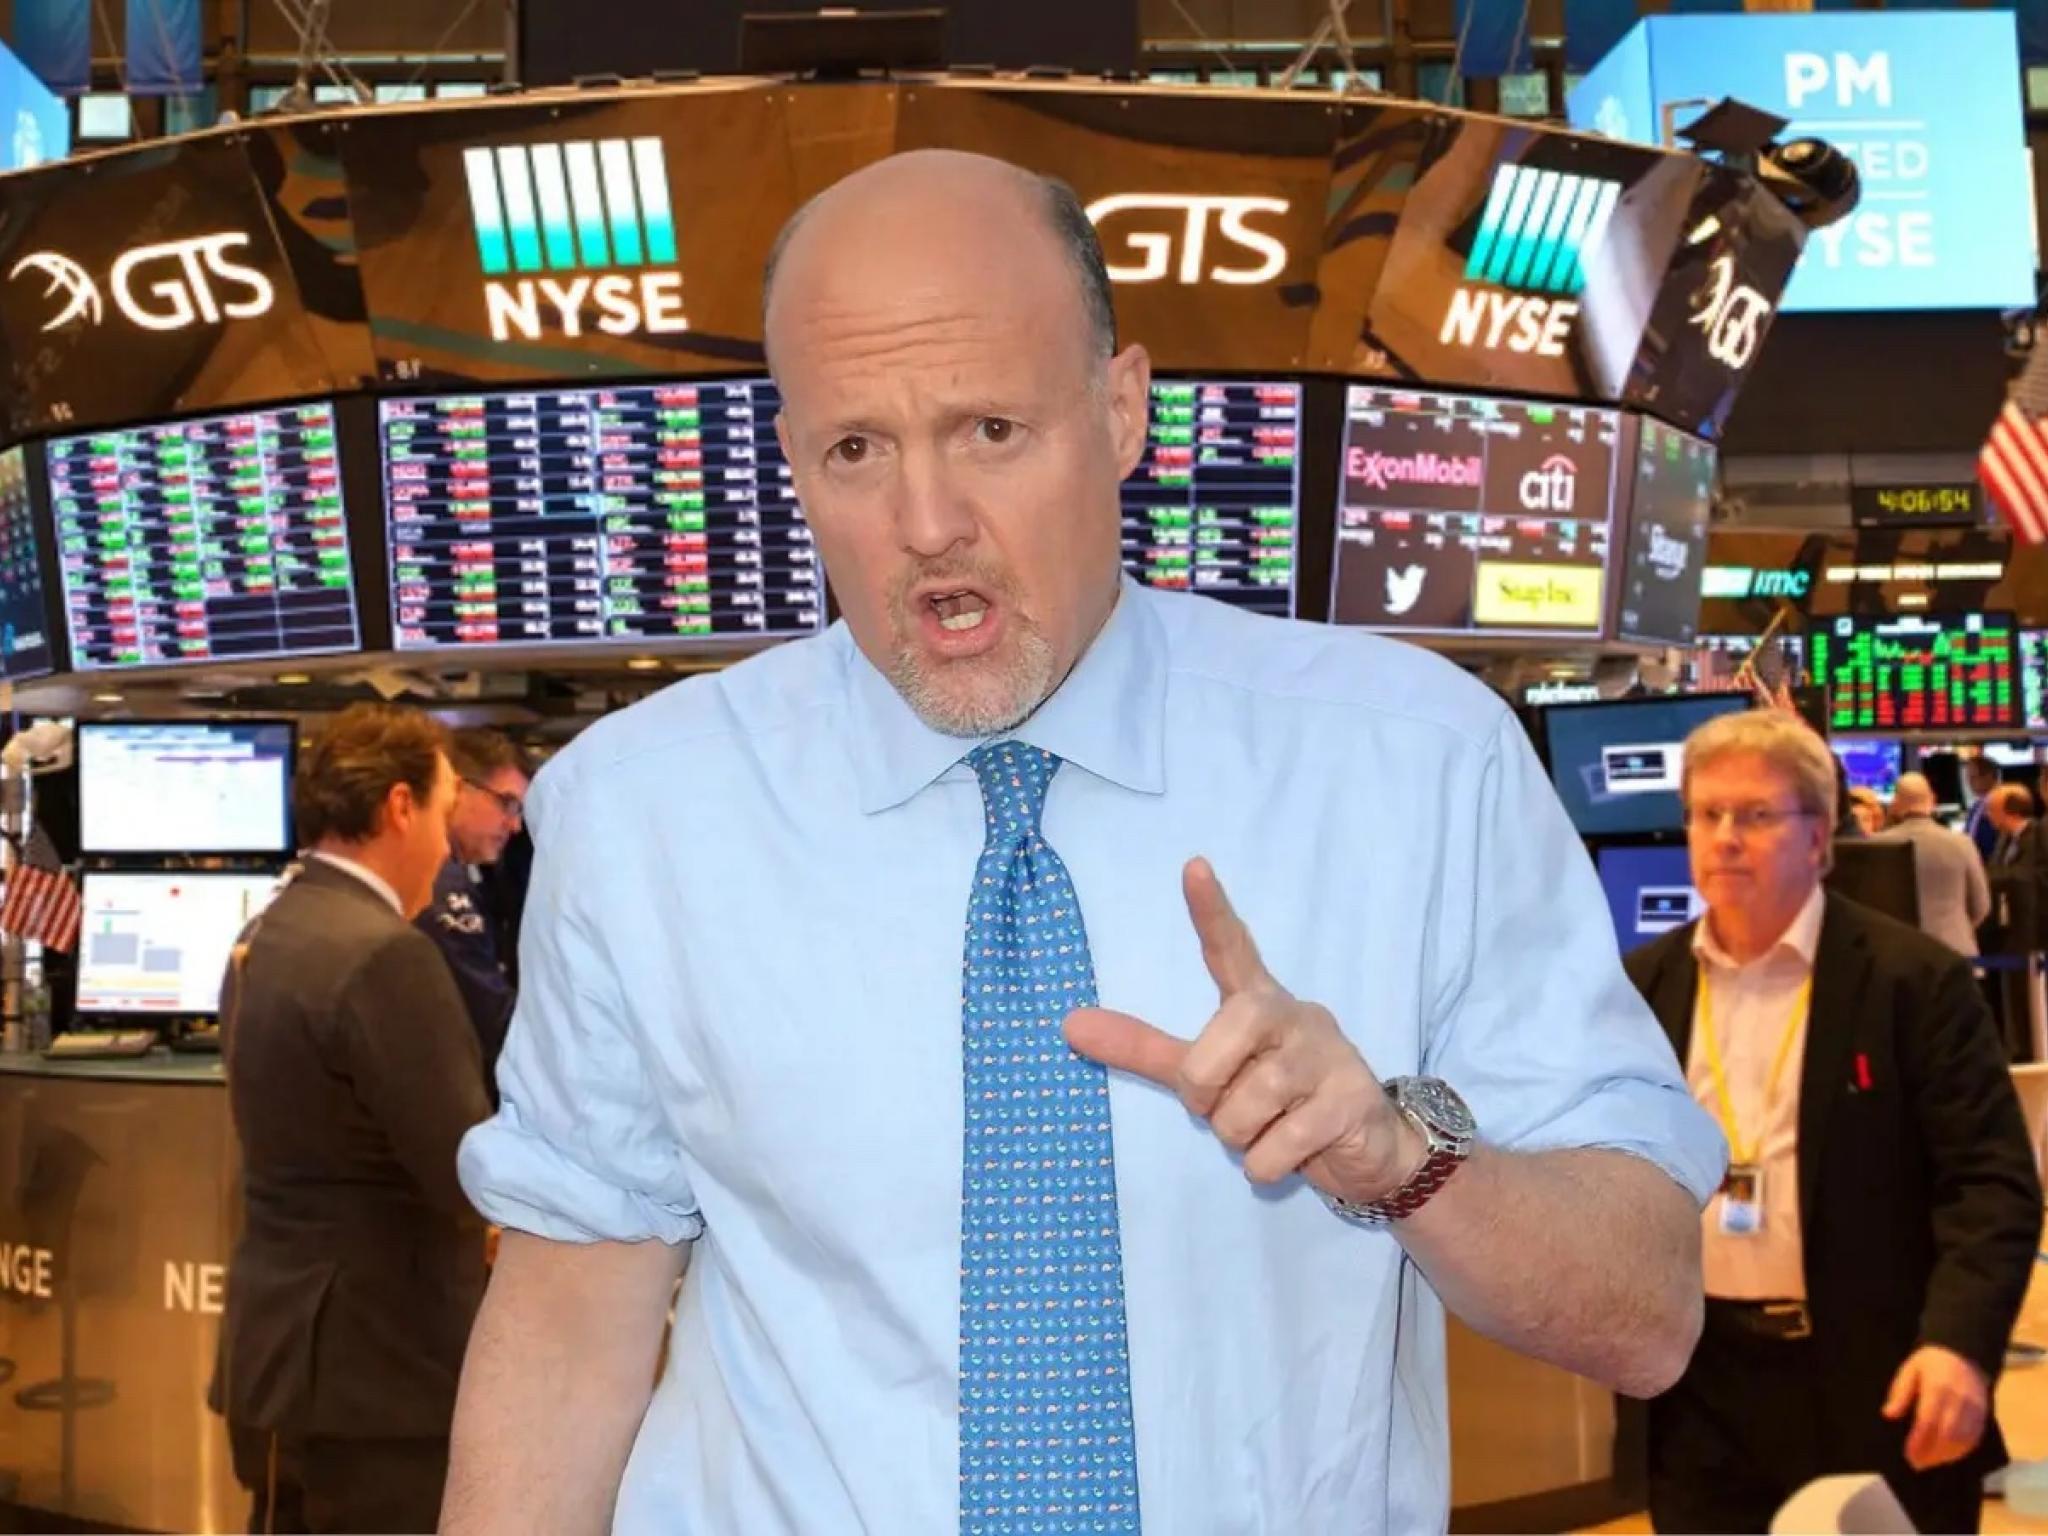  jim-cramer-this-tech-stock-has-moved-too-much-too-high-for-me 